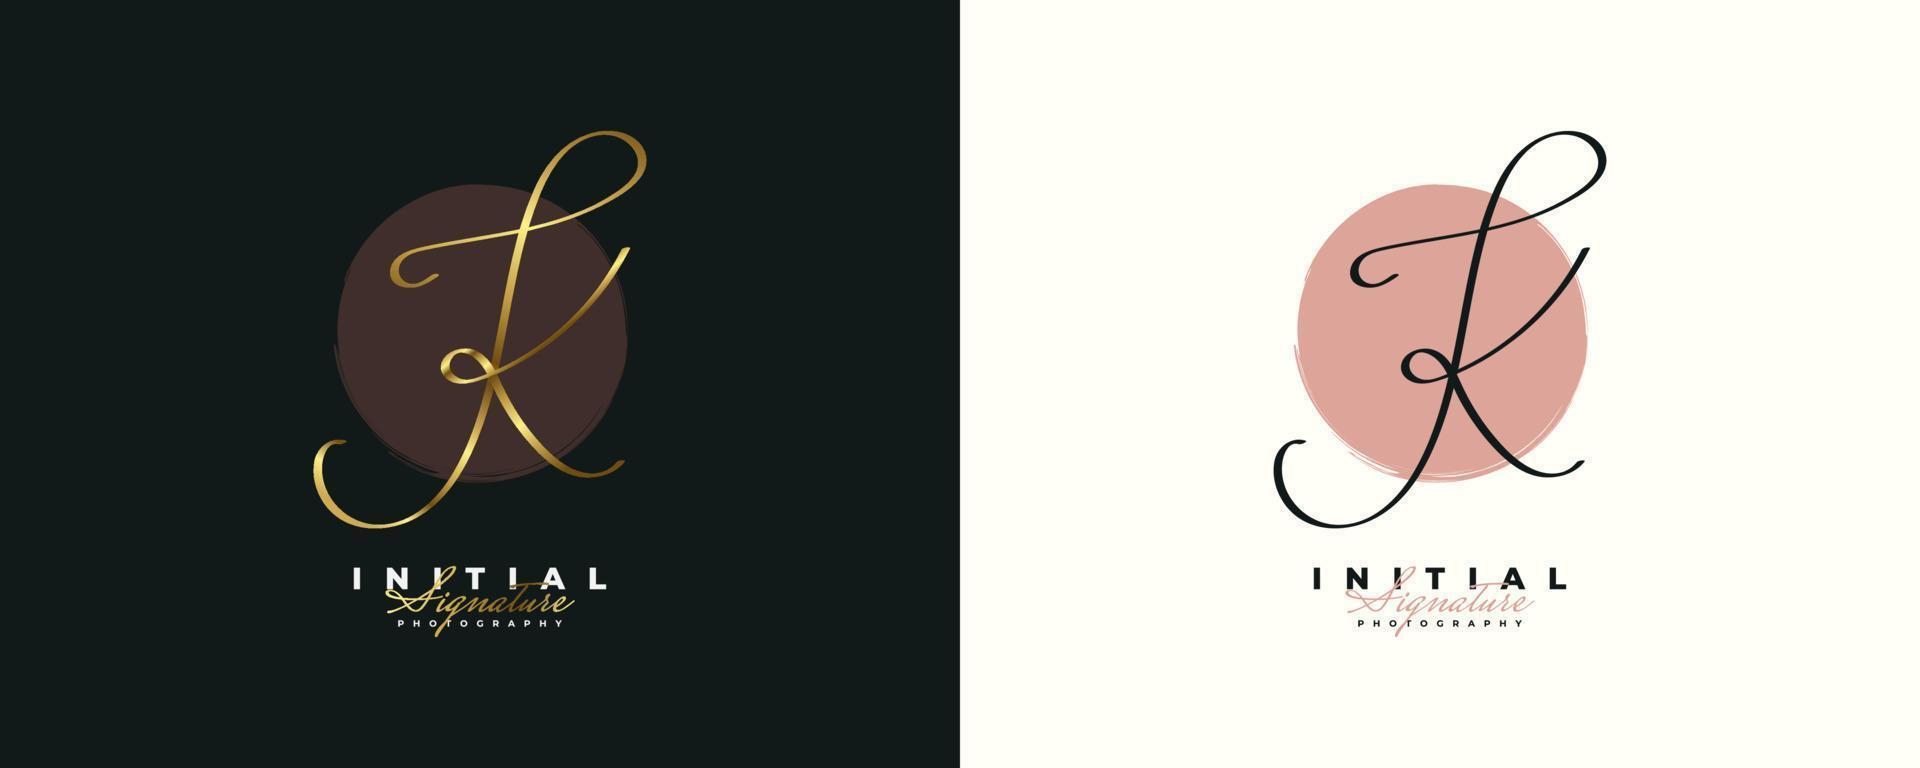 Initial J and K Logo Design in Elegant Gold Handwriting Style. JK Signature Logo or Symbol for Wedding, Fashion, Jewelry, Boutique, and Business Brand Identity vector